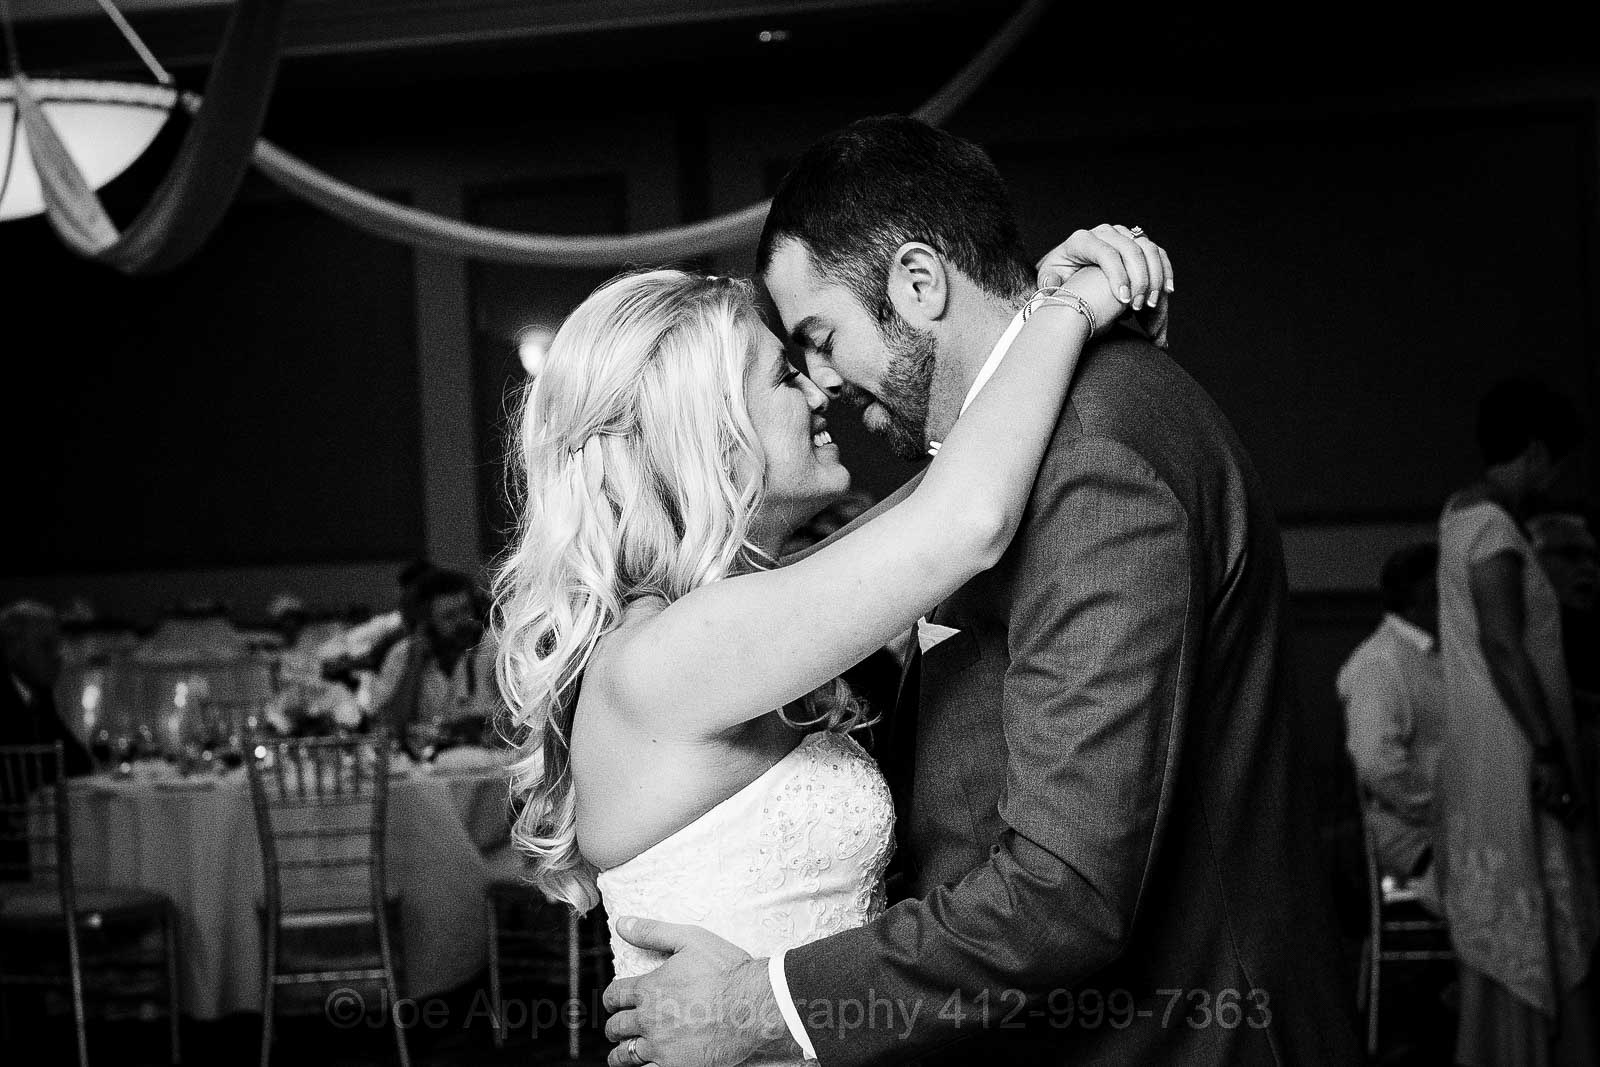 A bride and groom smash noses together as they share their first dance at their Embassy Suites Pittsburgh wedding.